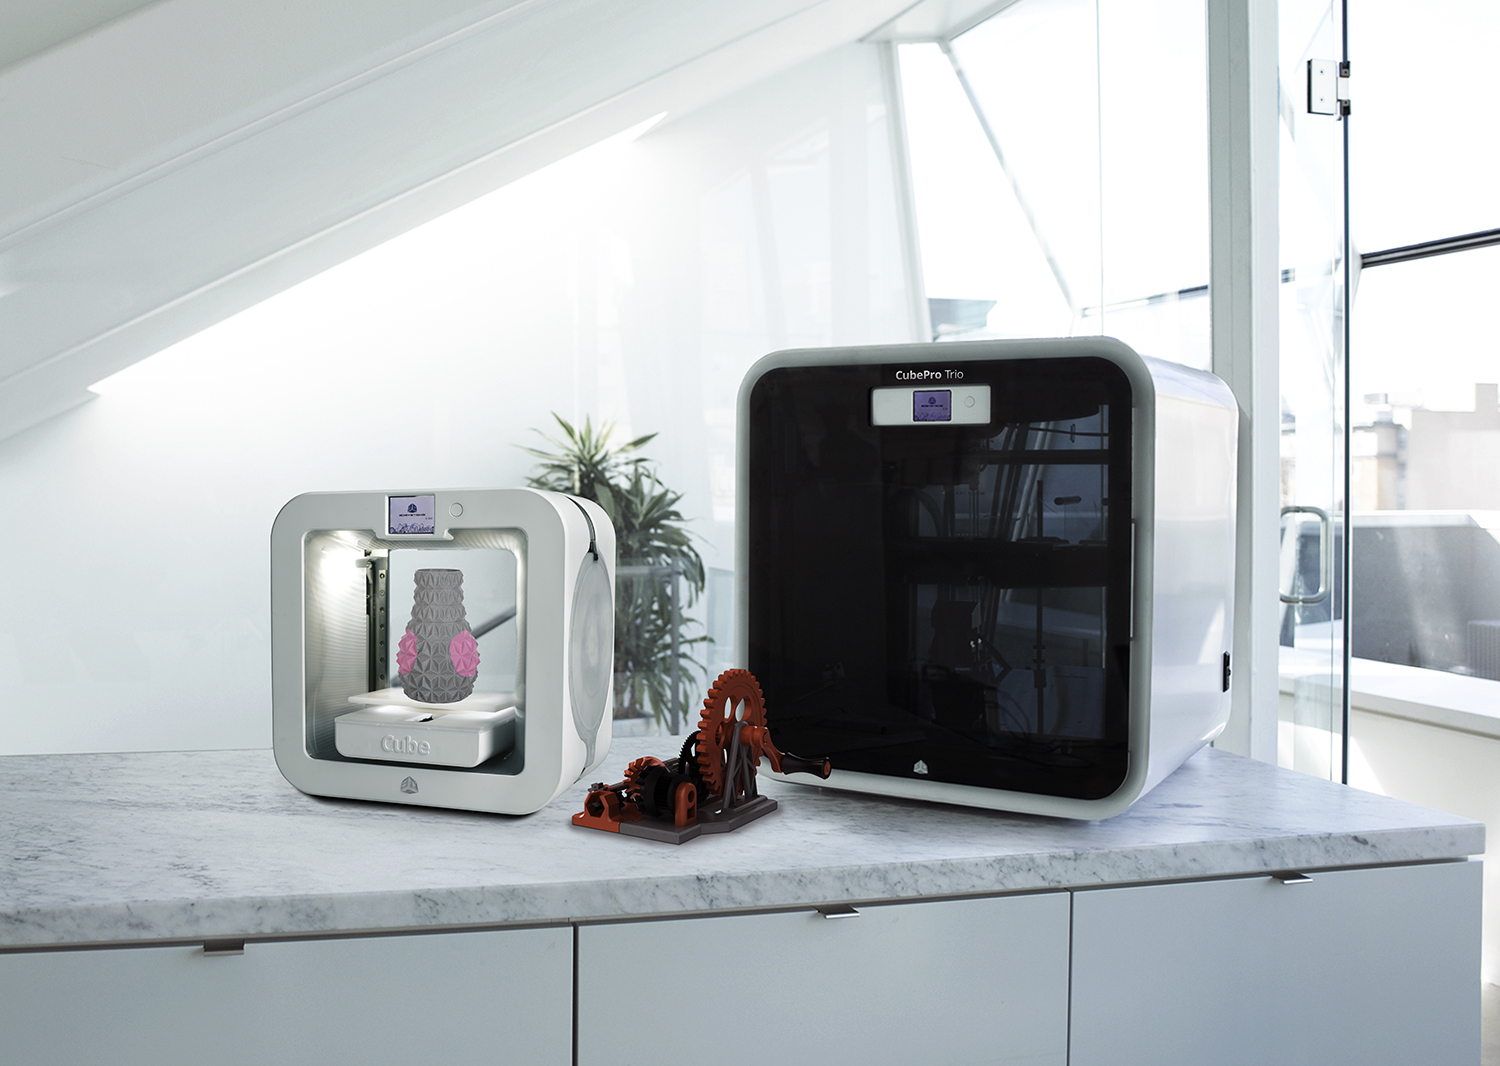 Cube 3 and CubePro 3D Printers